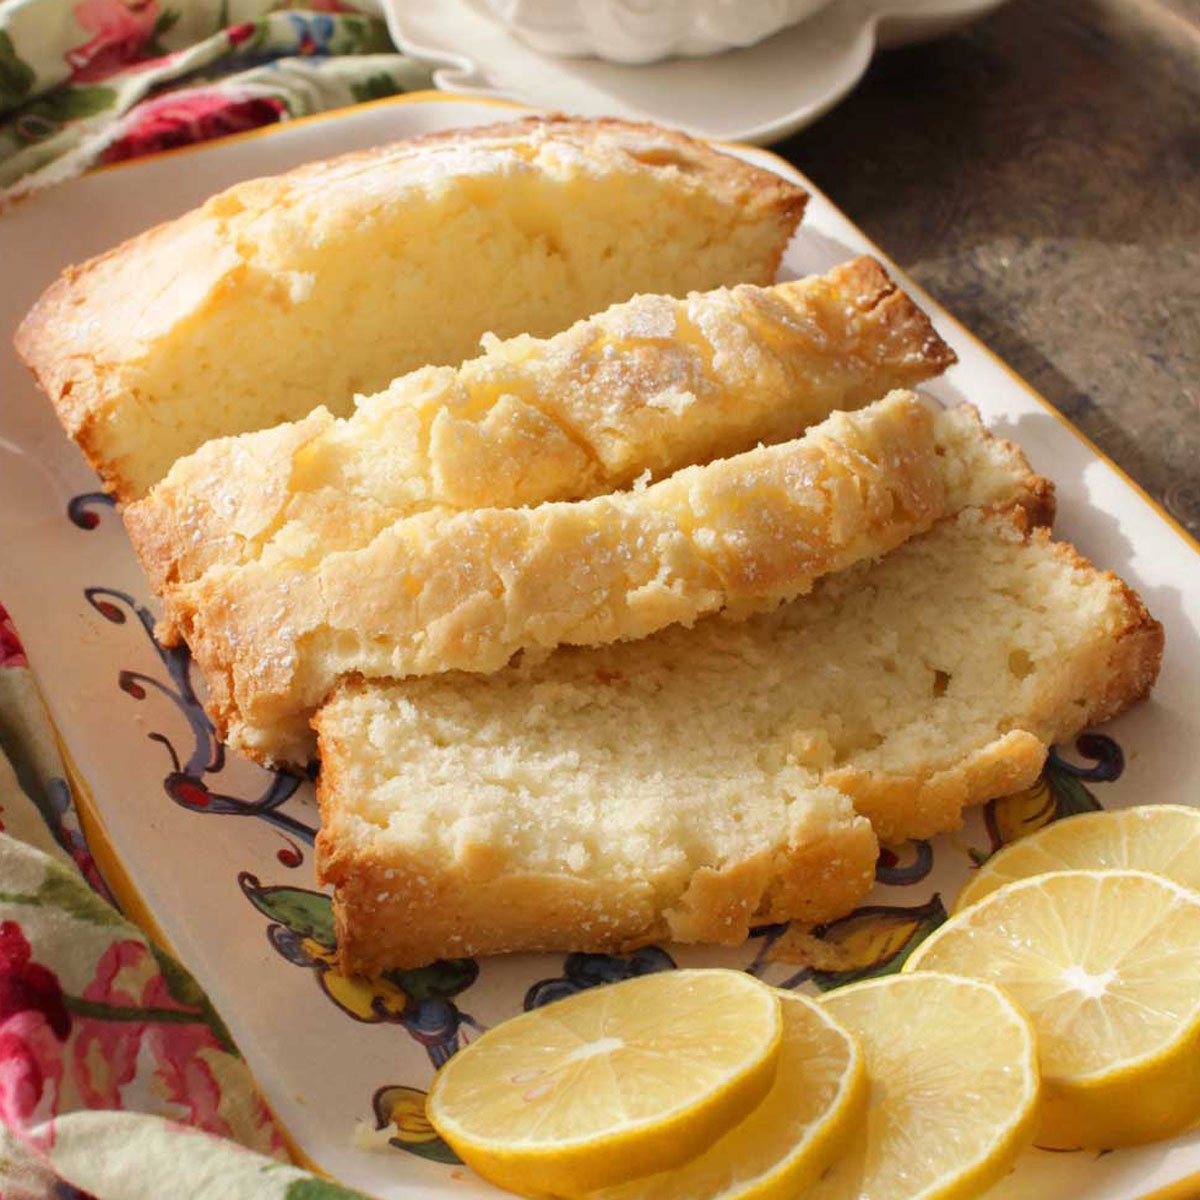 Mini-Loaf Pound Cake (easy and delicious!) / The Grateful Girl Cooks!